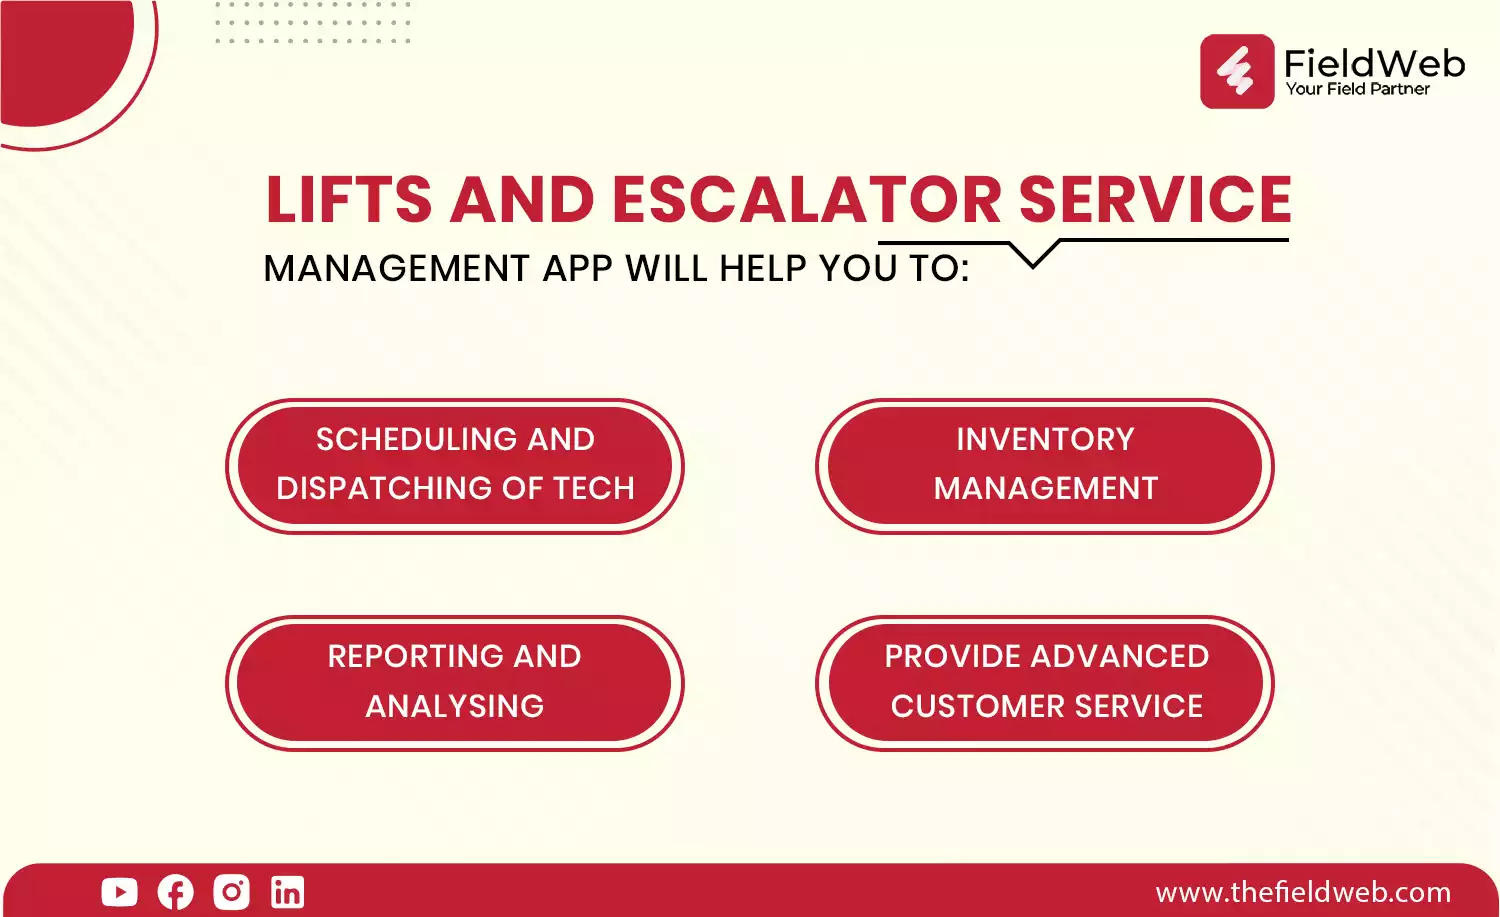 Lifts and Escalator service management app will help you